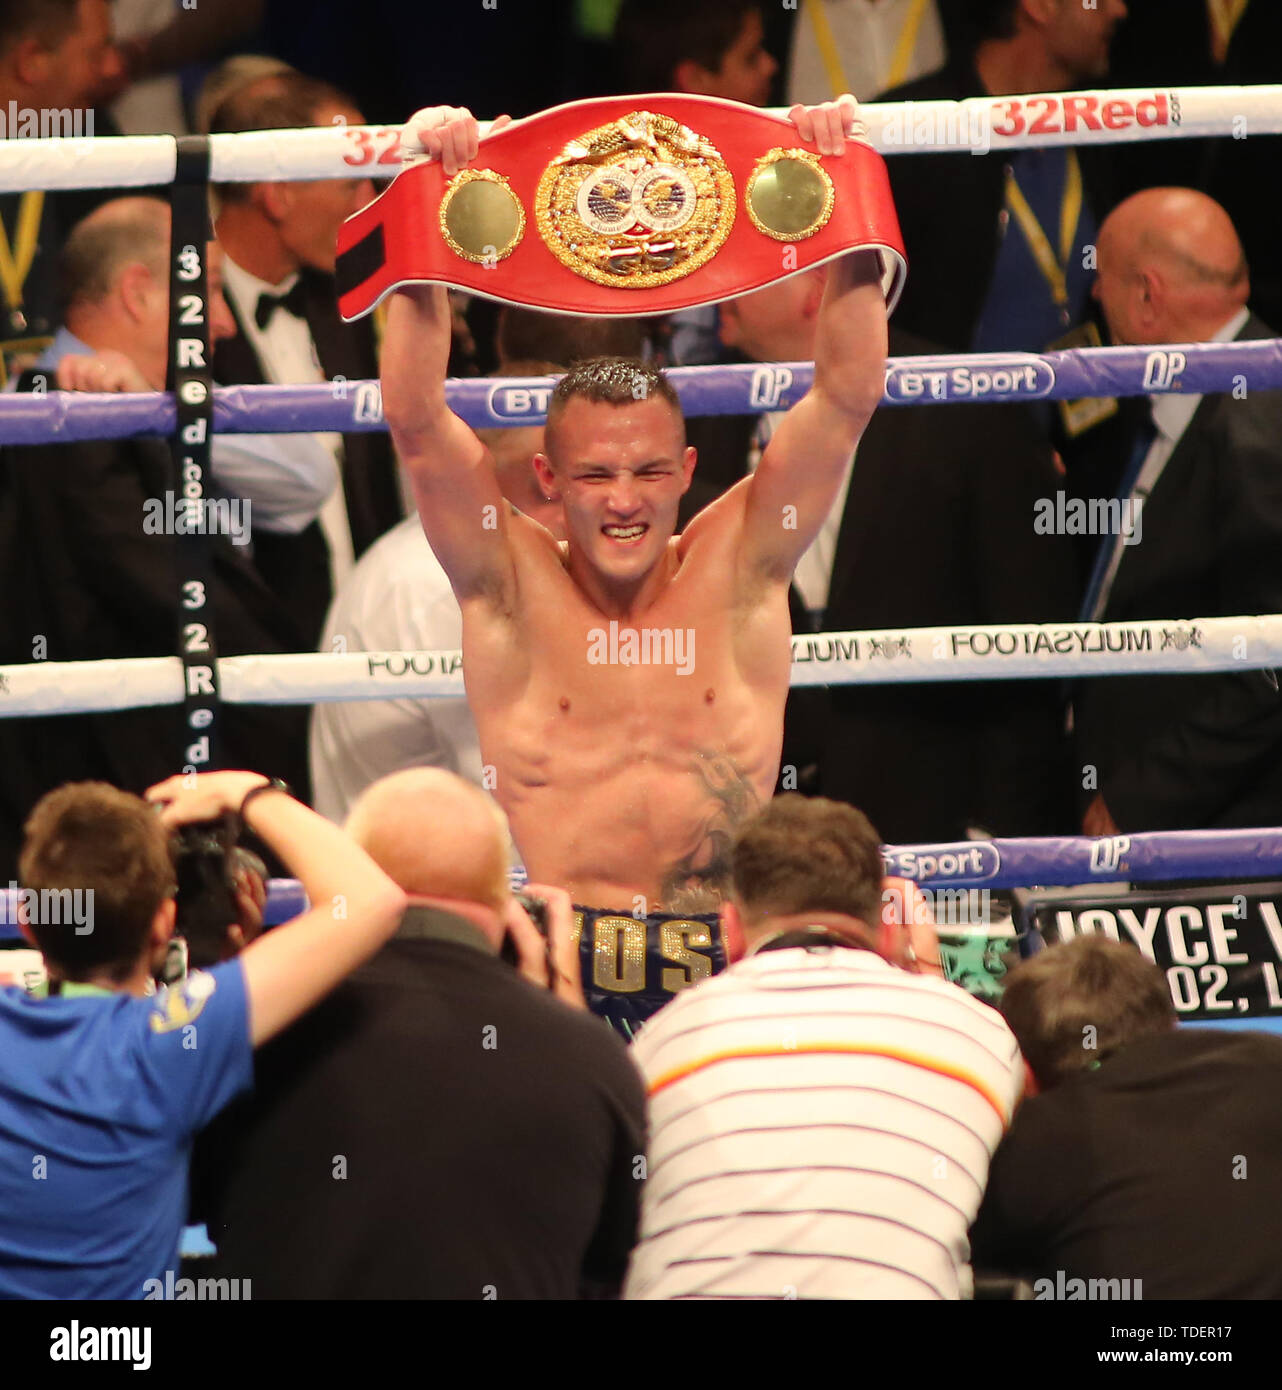 First Direct Arena, Leeds, West Yorkshire, UK. 15th June, 2019. Josh Warrington (Leeds) retains the world title after beating Kid Galahad (Sheffield) during the International Boxing Federation (IBF) World Featherweight Title. Credit: Stephen Gaunt/Alamy Live News Stock Photo